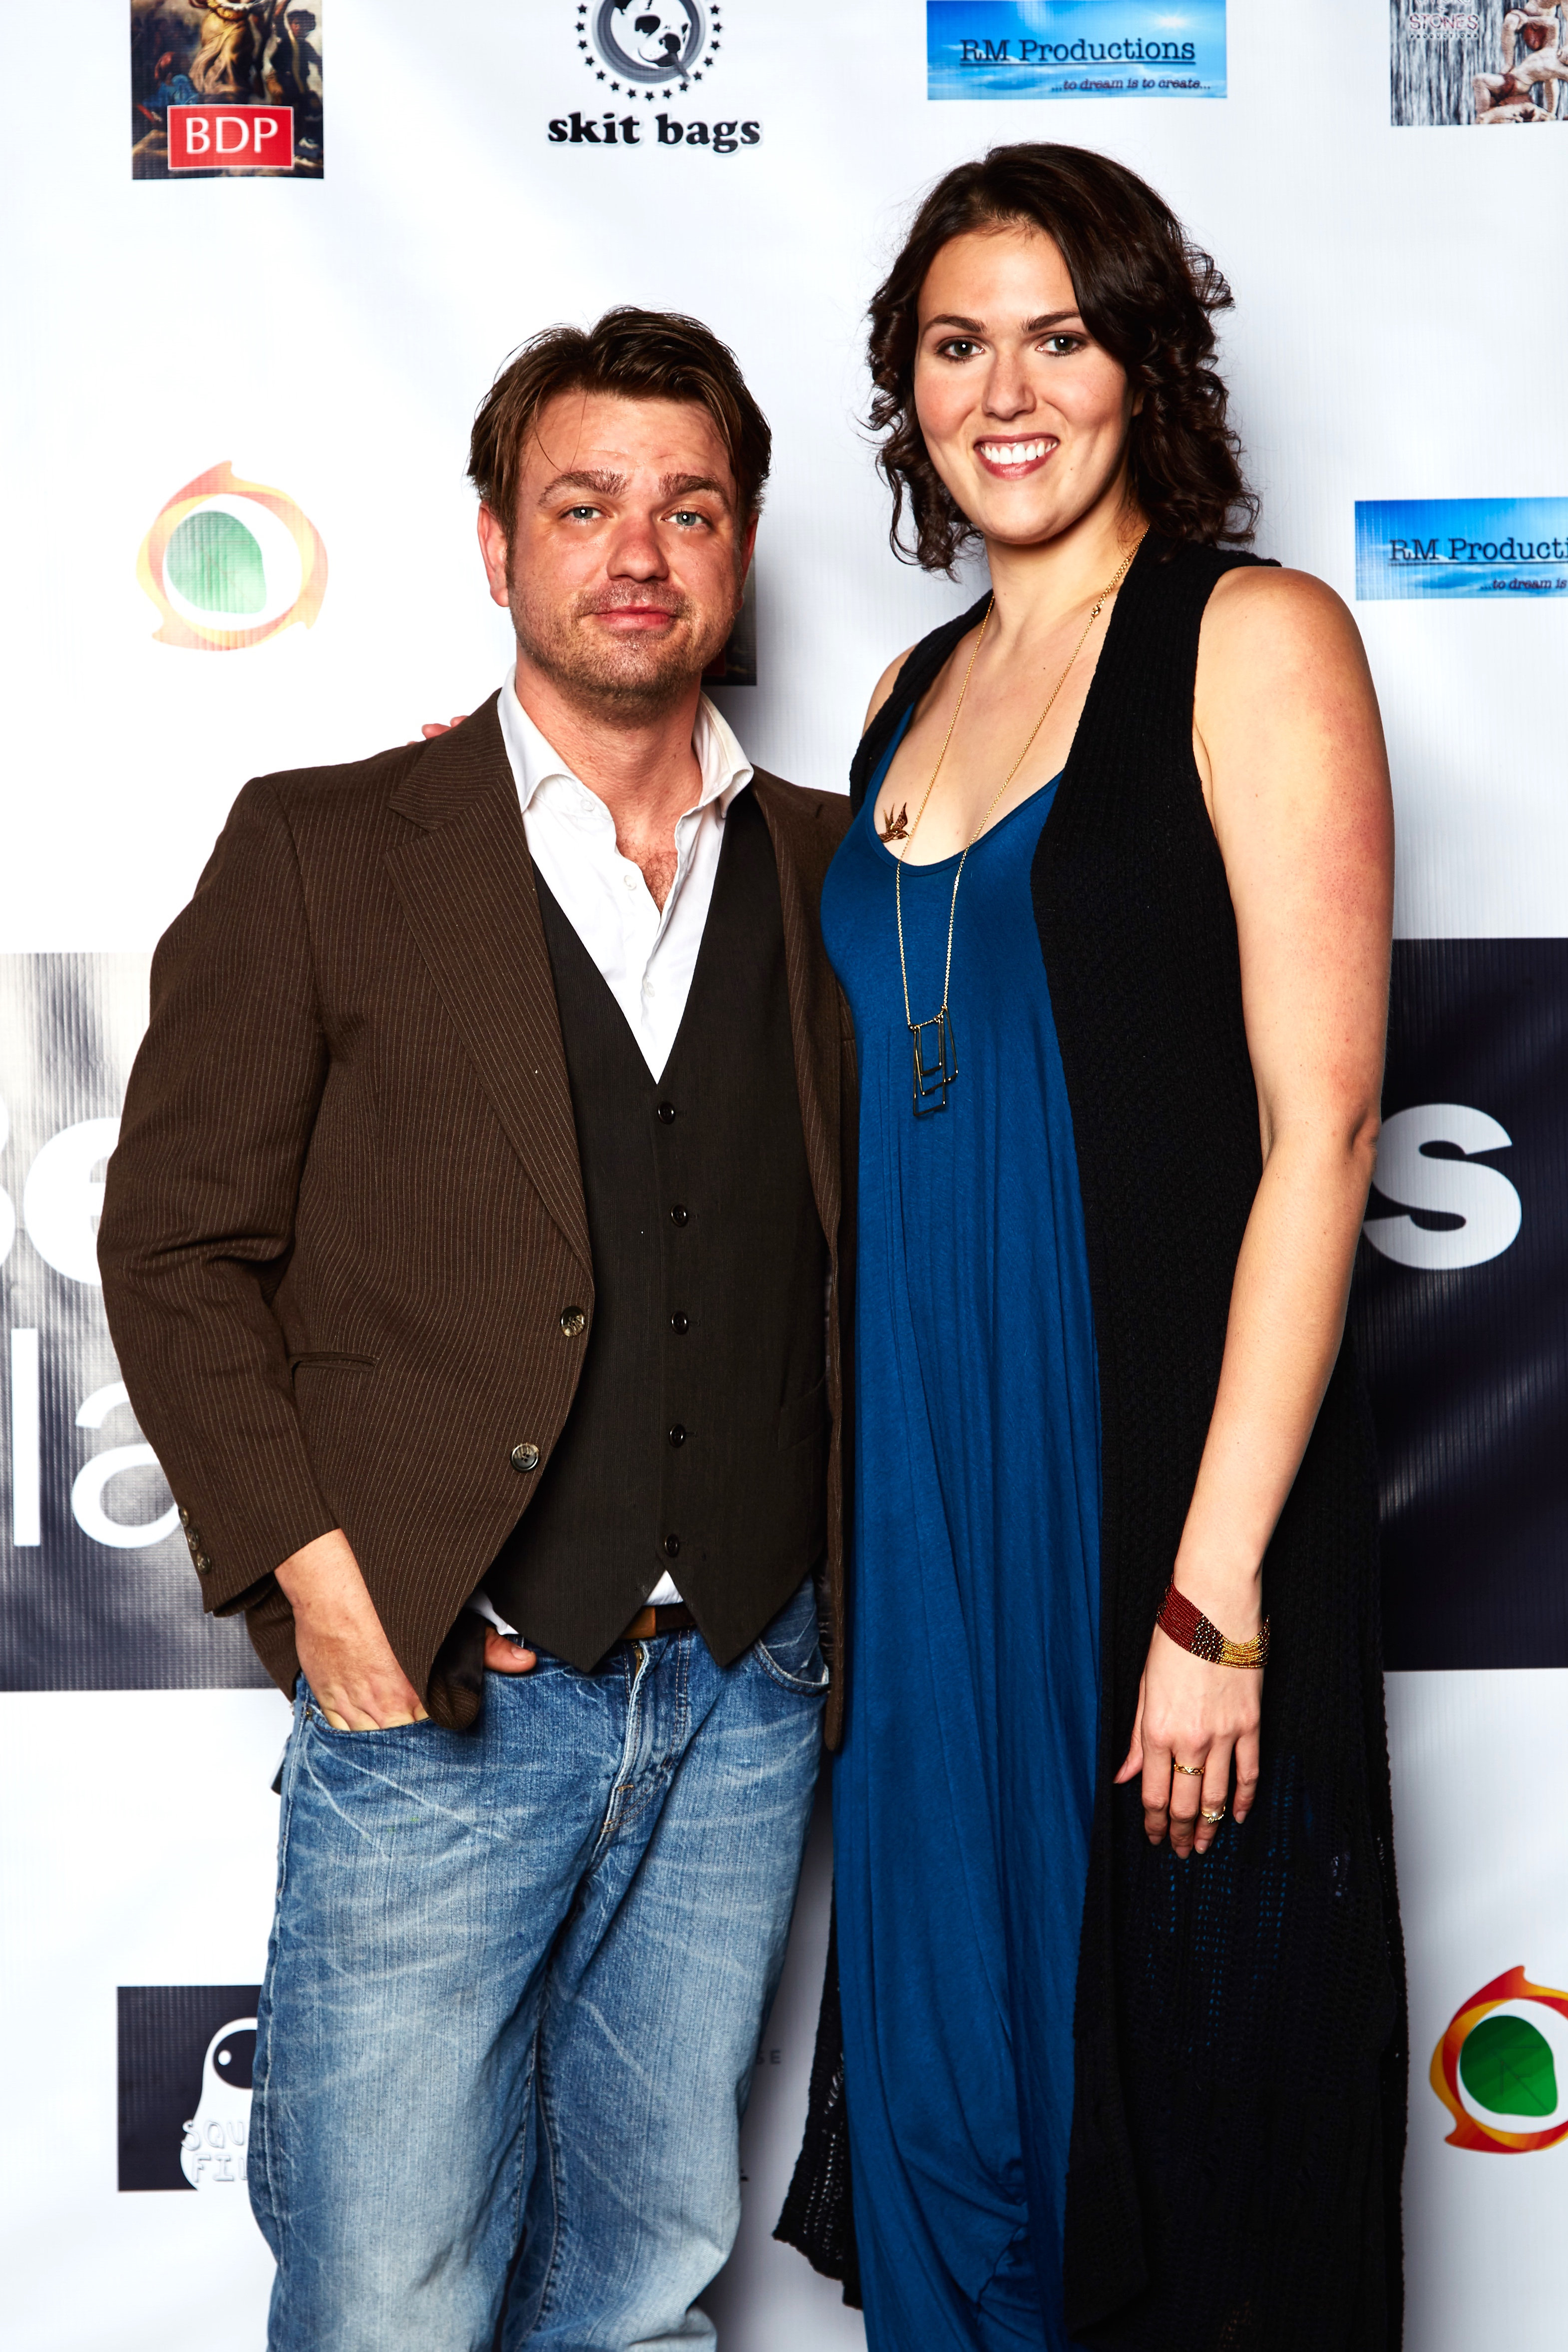 Director Rachael Meyers and Lead Actor Bryan McKinley on the red carpet at the Beverly Hills Playhouse Film Festival.